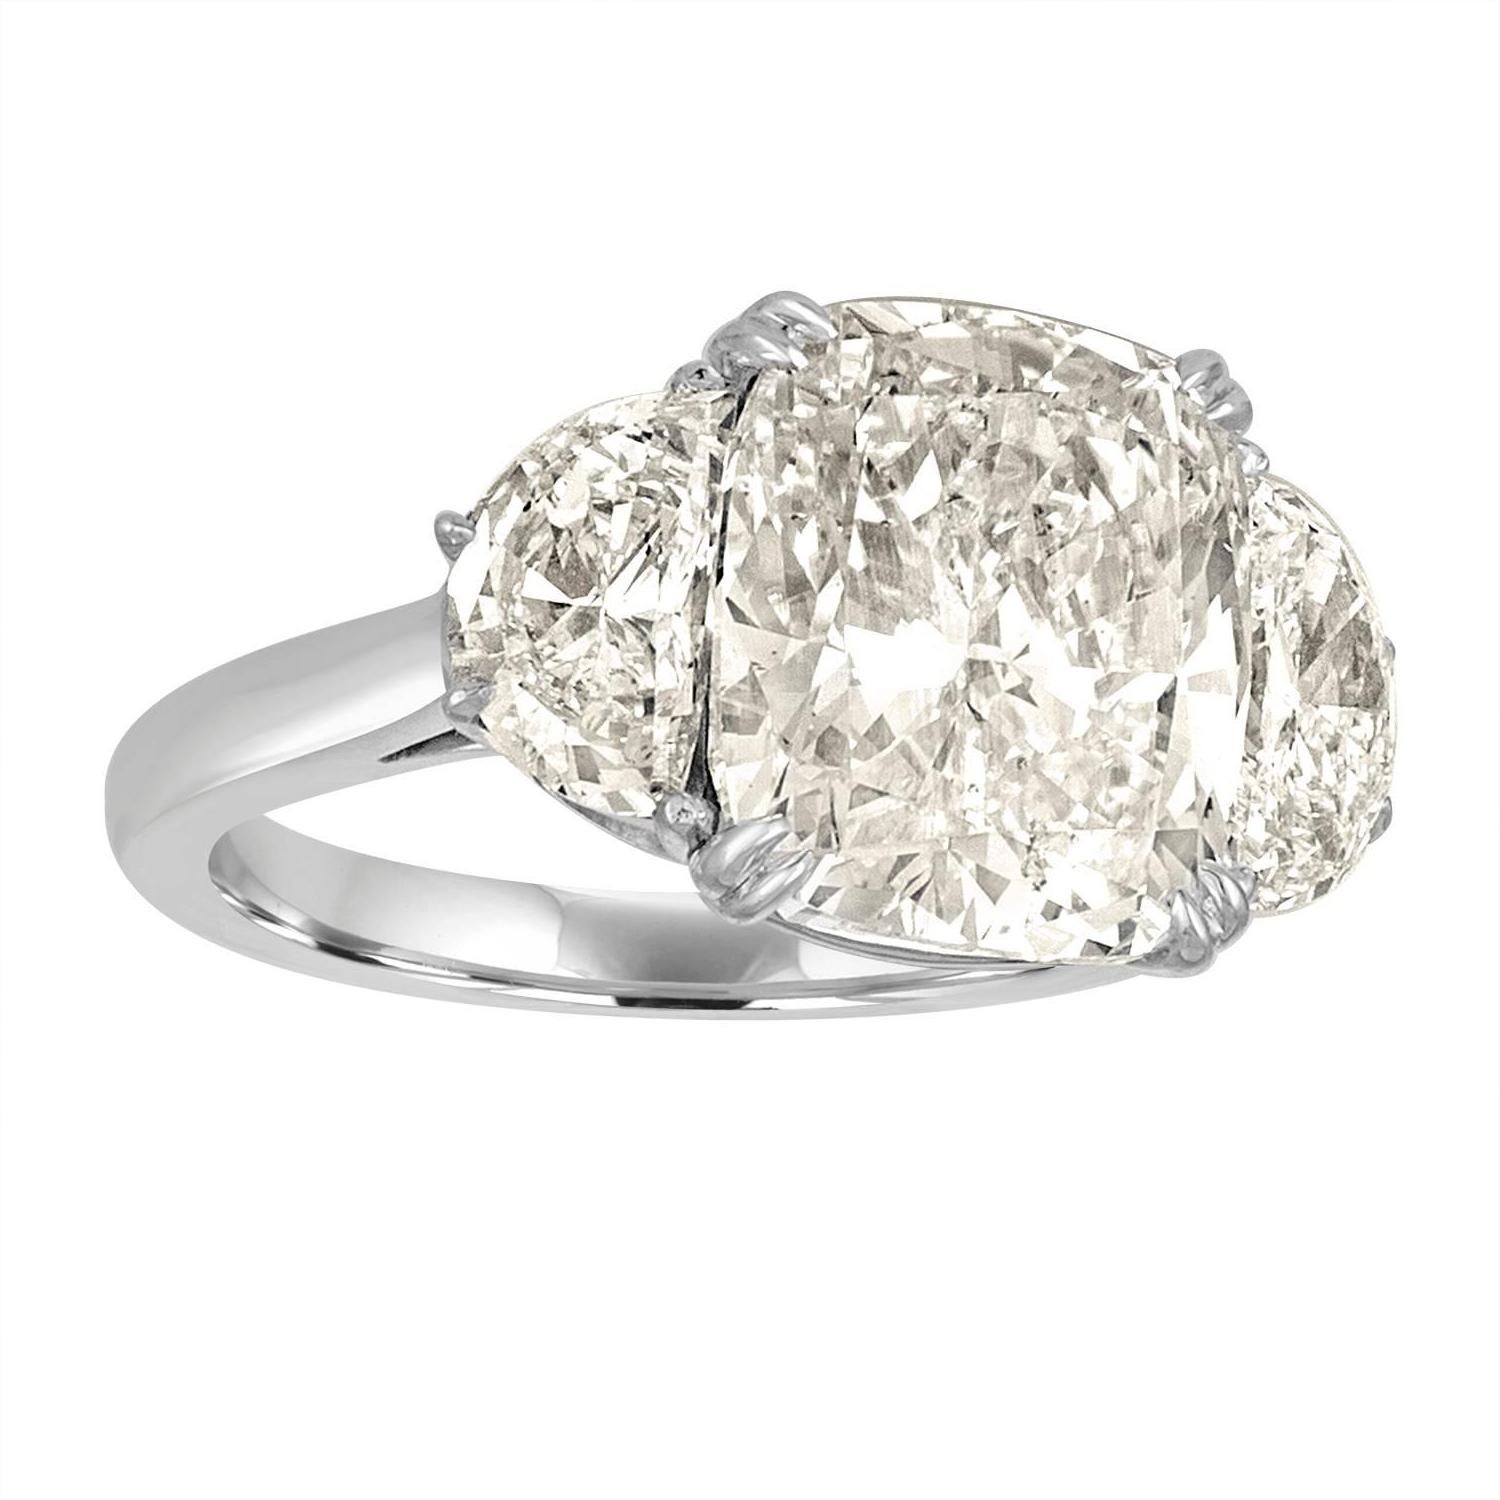 Contemporary 7.06 Carat Cushion Cut Diamond Set with Half Moons in Platinum Ring Mounting